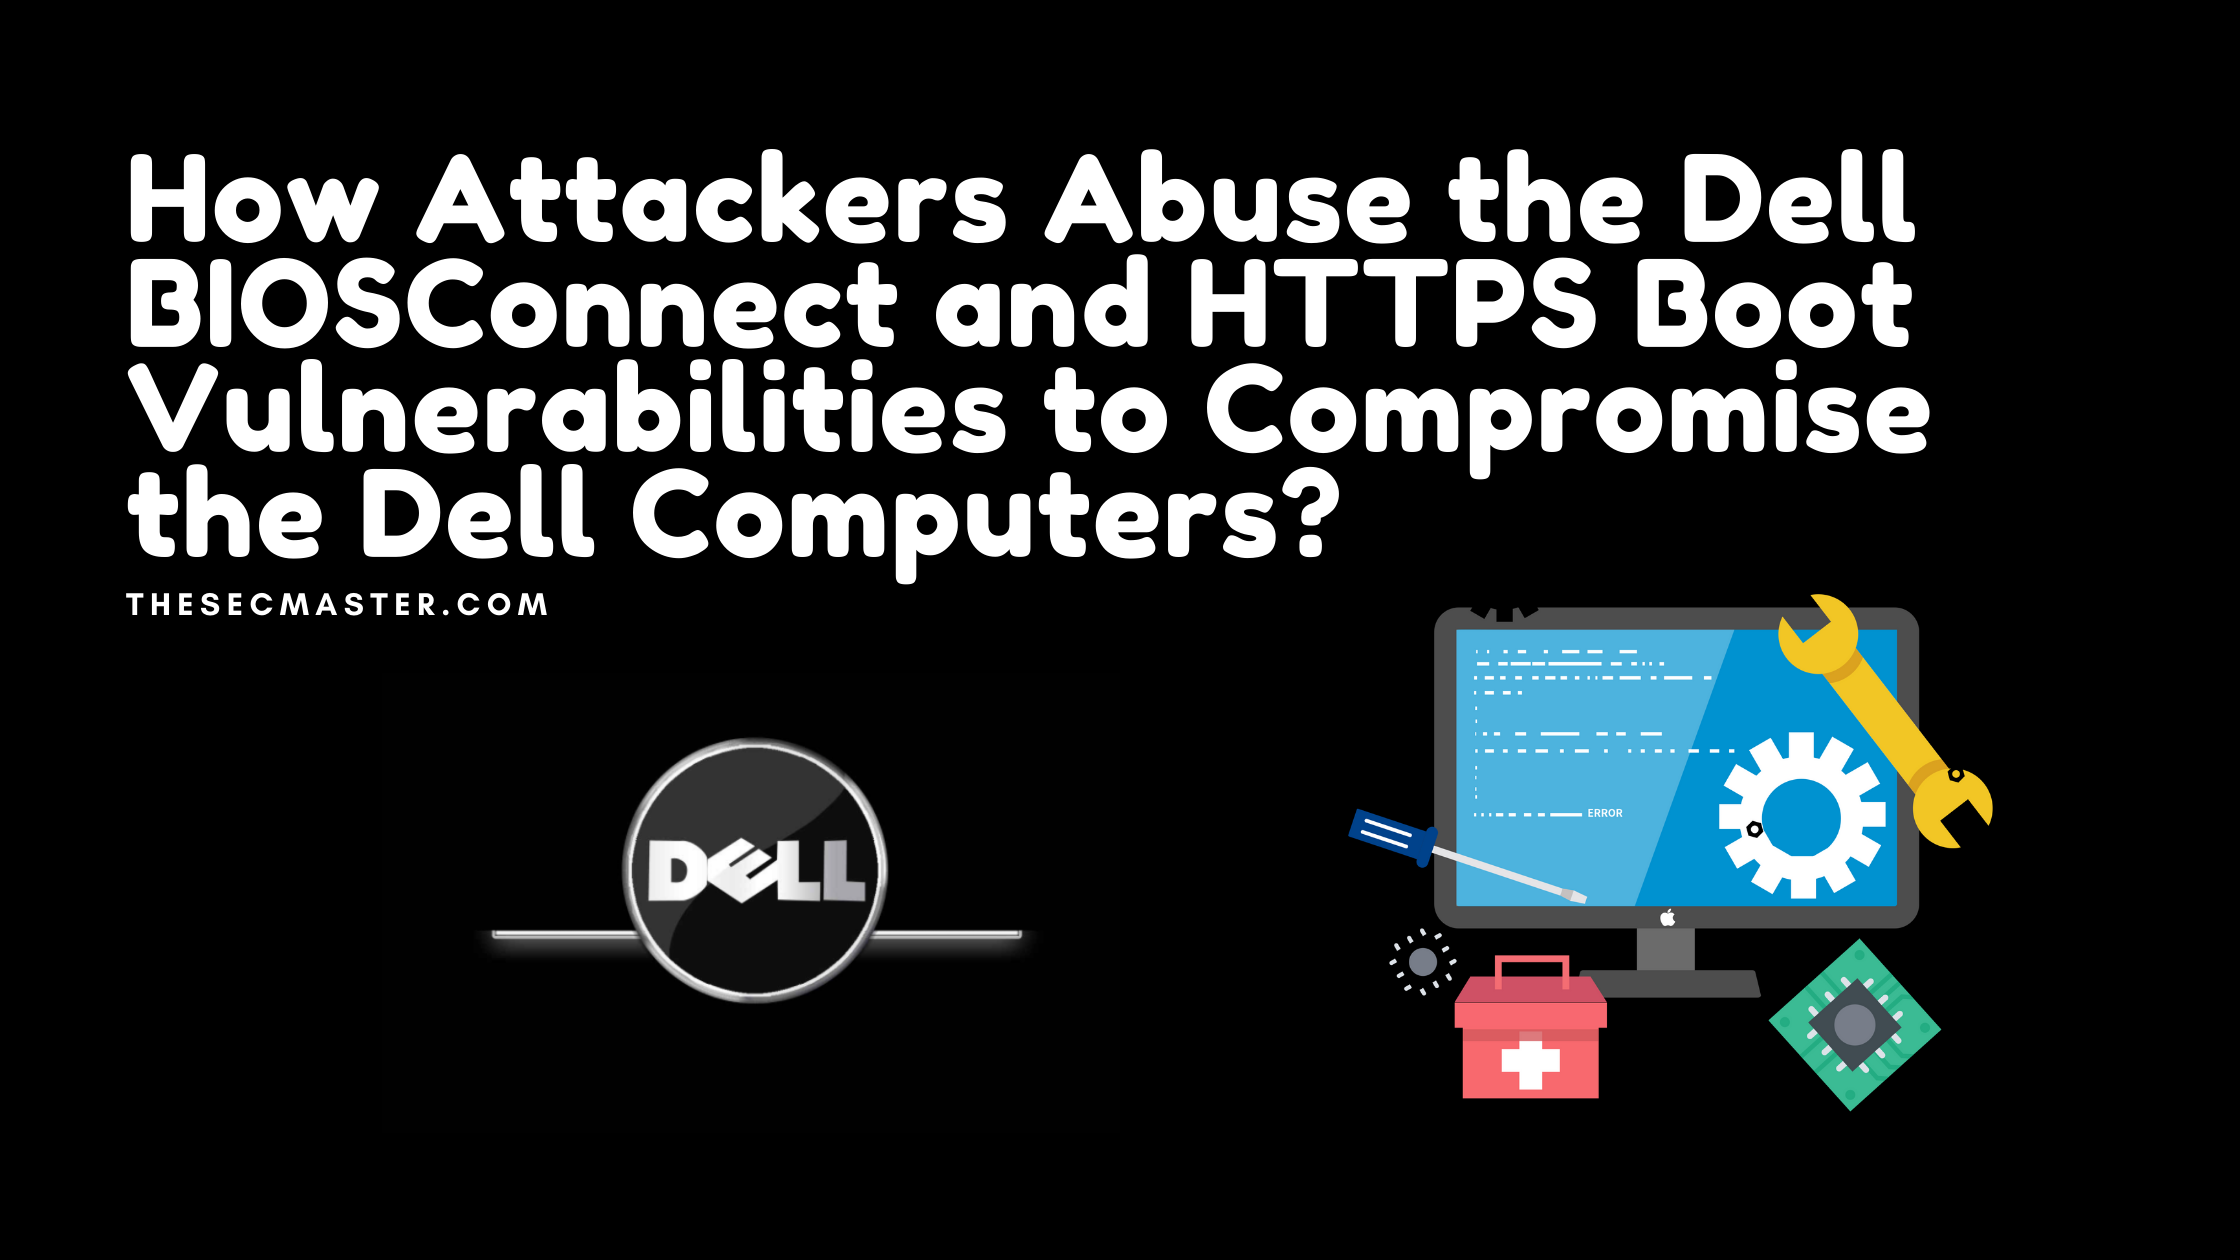 How Attackers Abuse The Dell Biosconnect And Https Boot Vulnerabilities To Compromise The Dell Computers